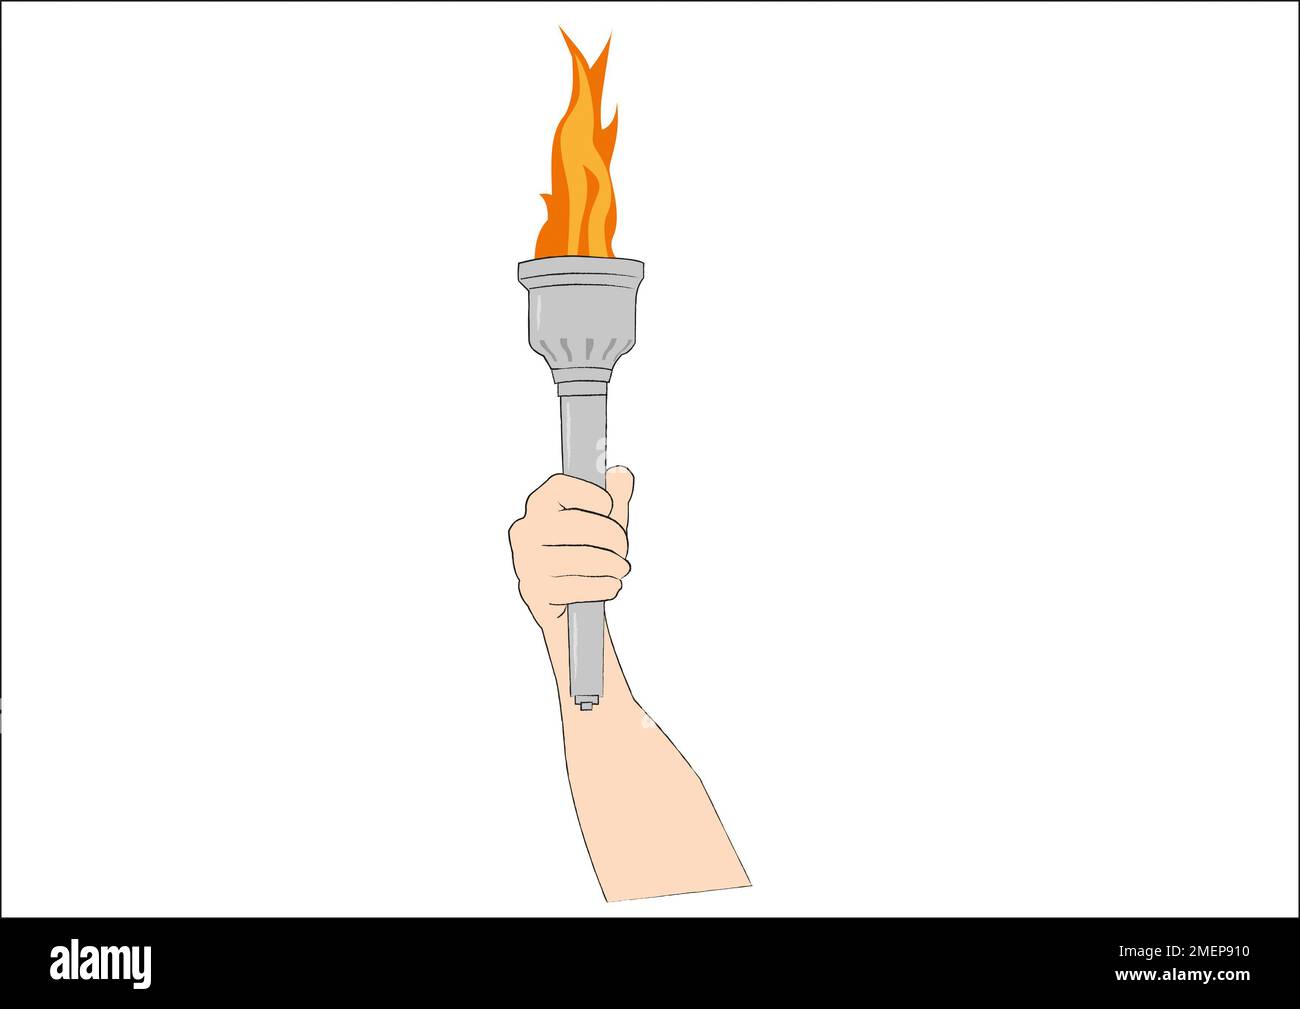 Olympics Torch Clipart Transparent PNG Hd, Classic Olympic Torch Icon, Torch  Icons, Medal, 2020 PNG Image For Free Download